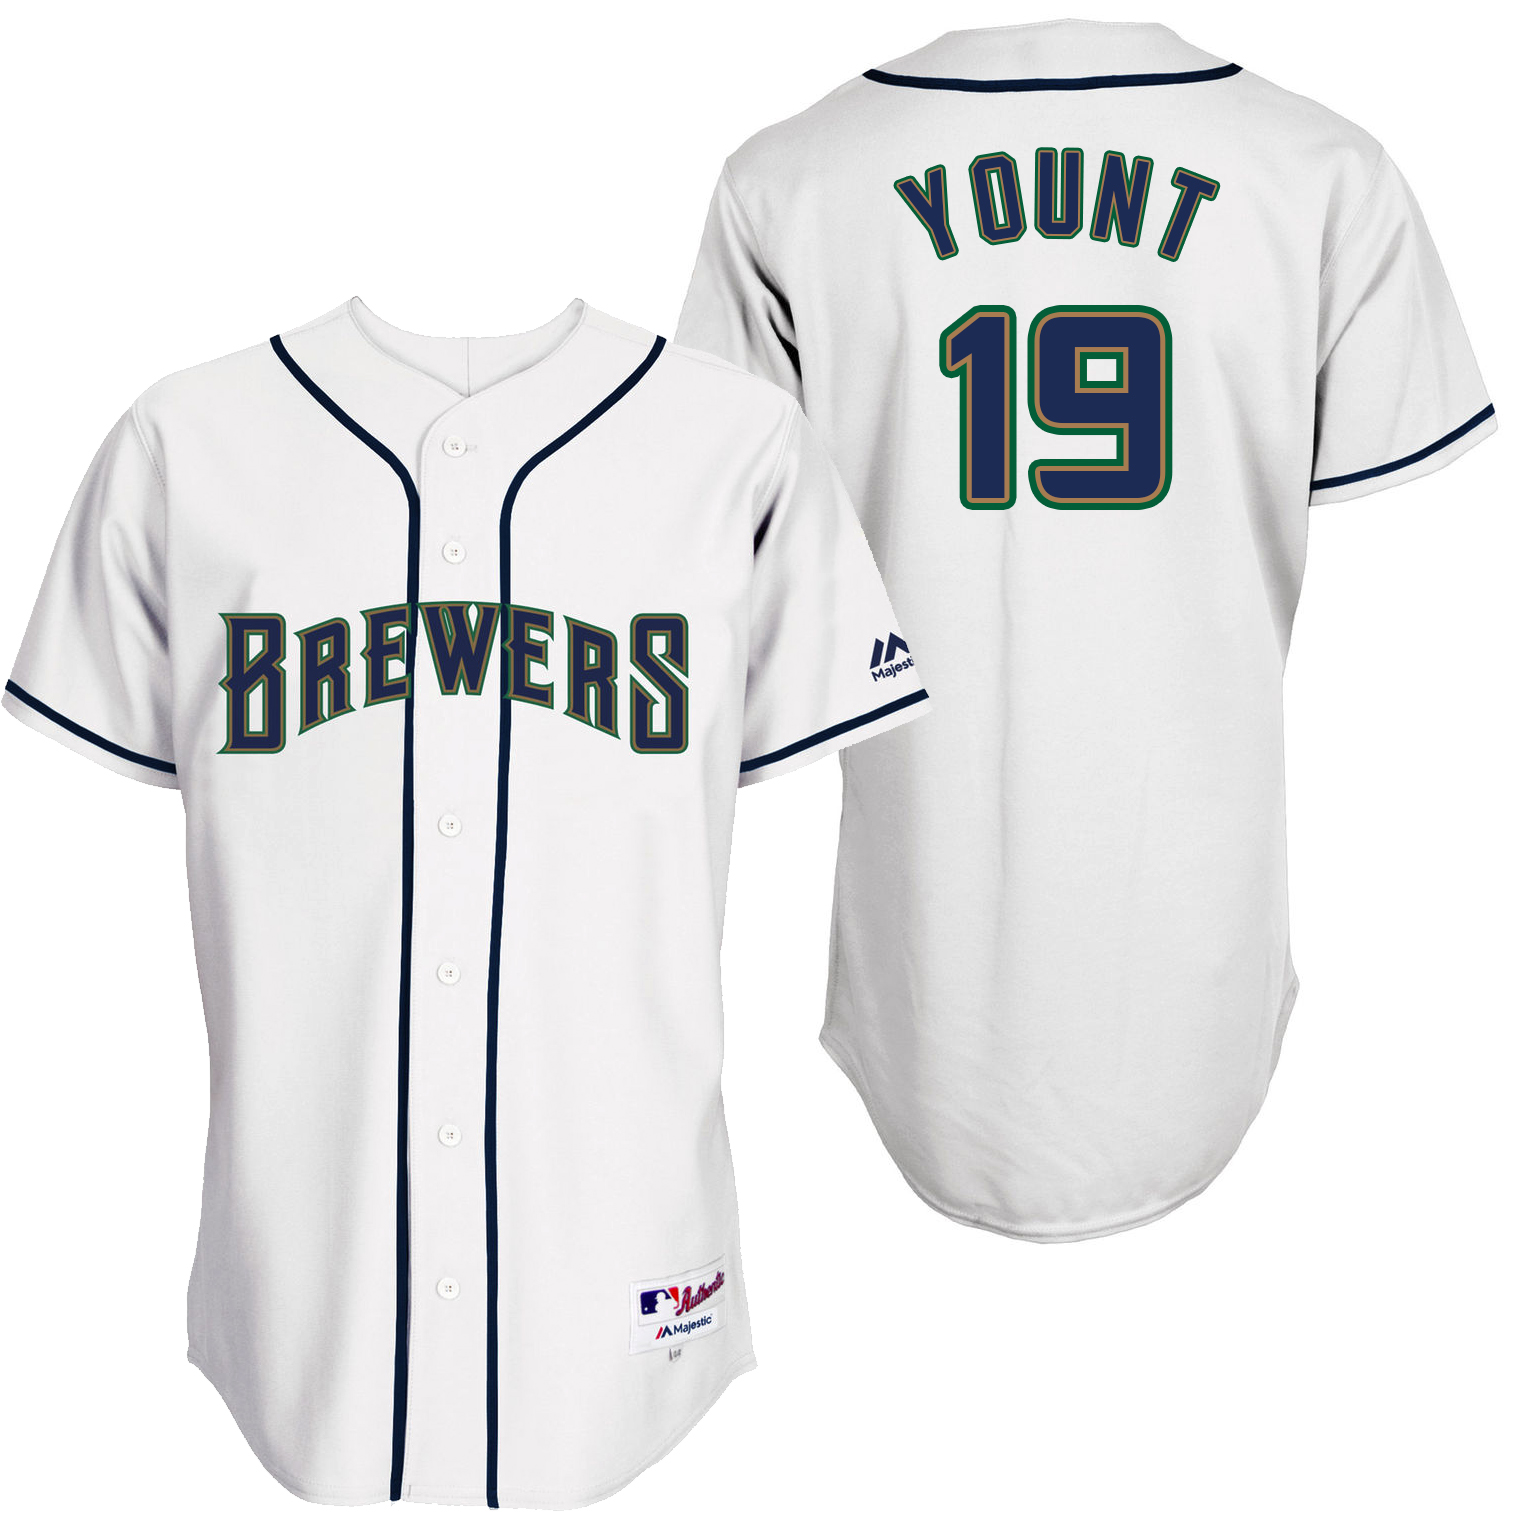 Brewers 19 Robin Yount White Throwback Jersey